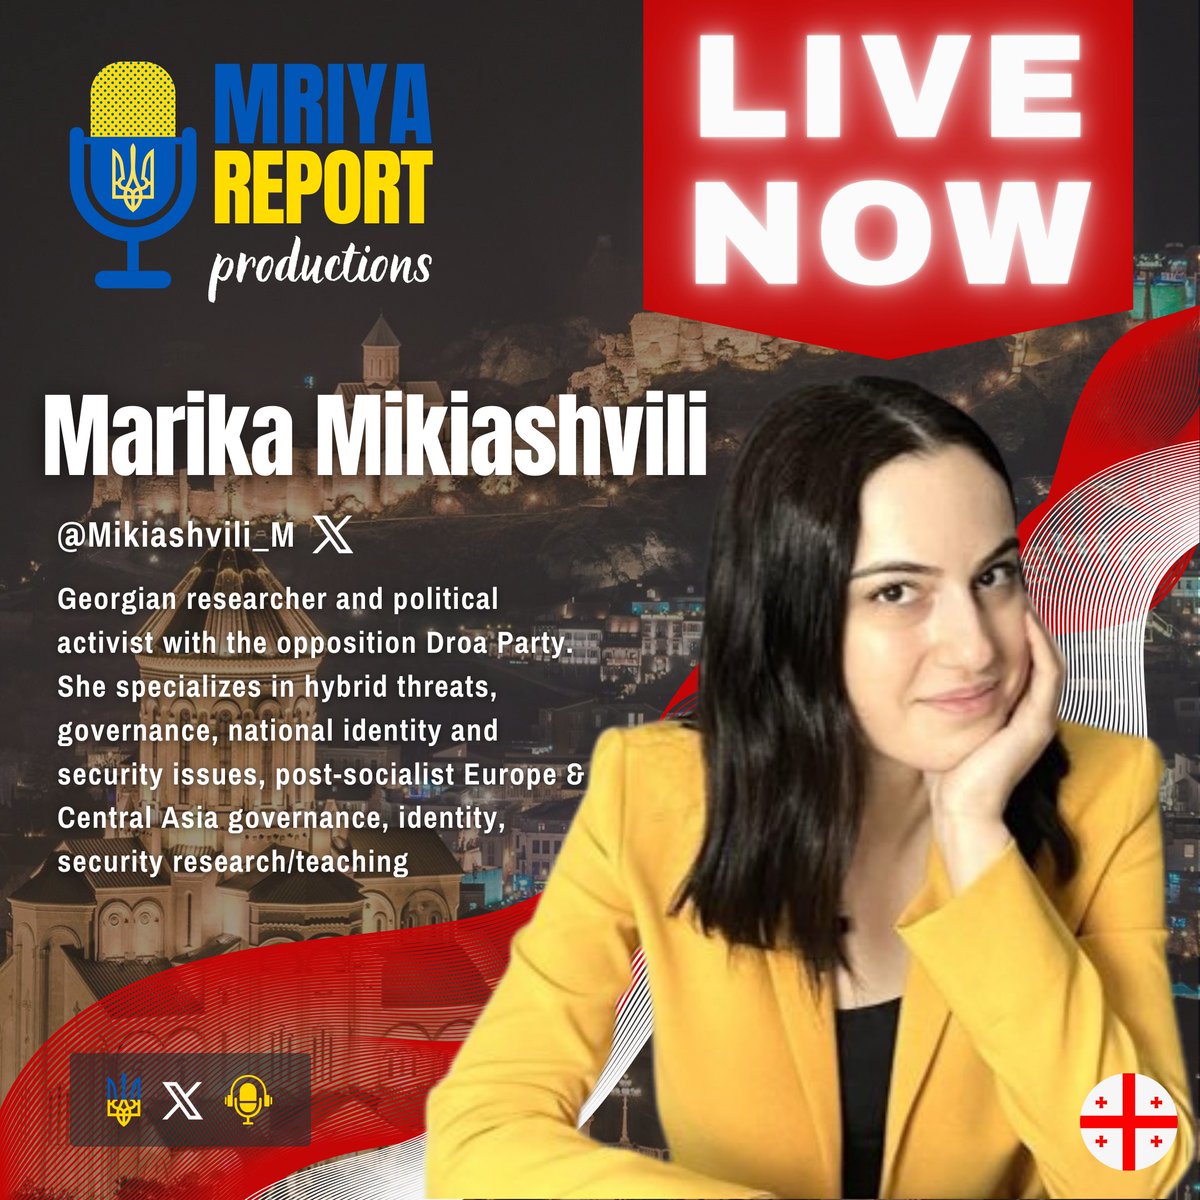 🇬🇪 LIVE NOW 🇬🇪 Please join us for a conversation with our very special guest Marika Mikiashvili @Mikiashvili_M! Marika is a #Georgian researcher and political activist with the opposition Droa Party. She specializes in hybrid threats, governance, national identity and security…